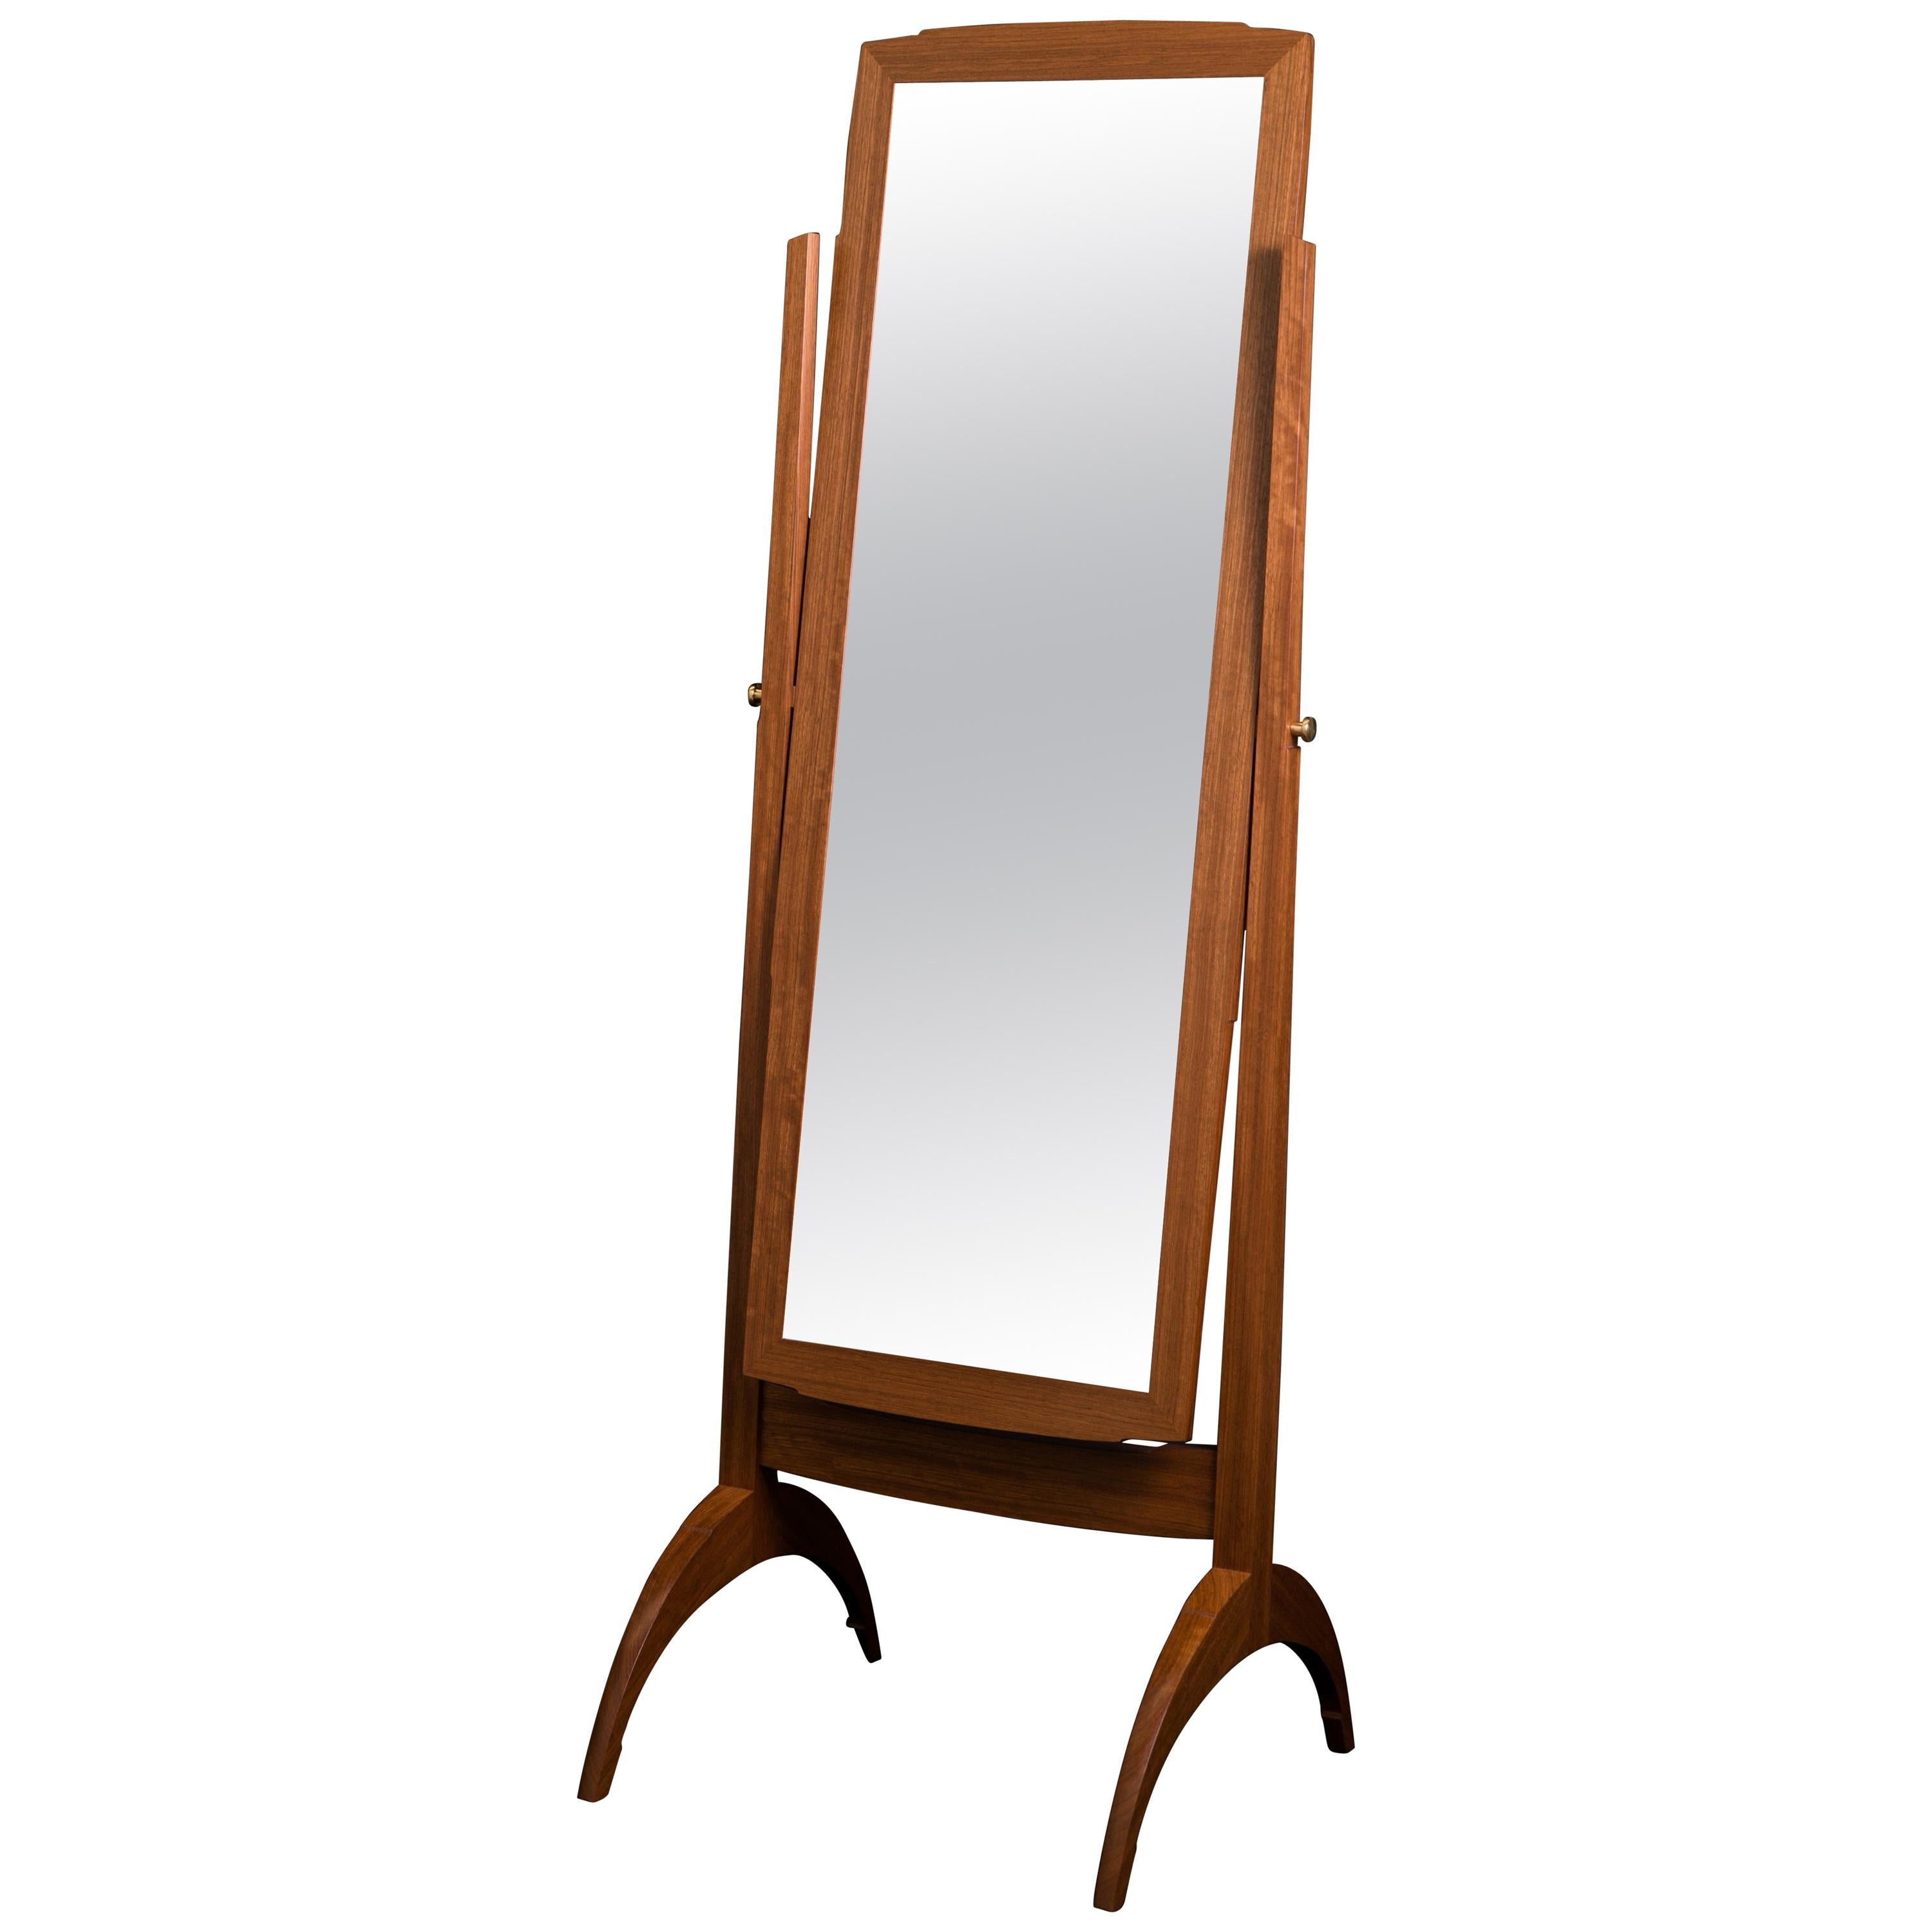 Full-Size Tilting Cheval Mirror in Jatoba and Fabric with Brass Knobs For Sale